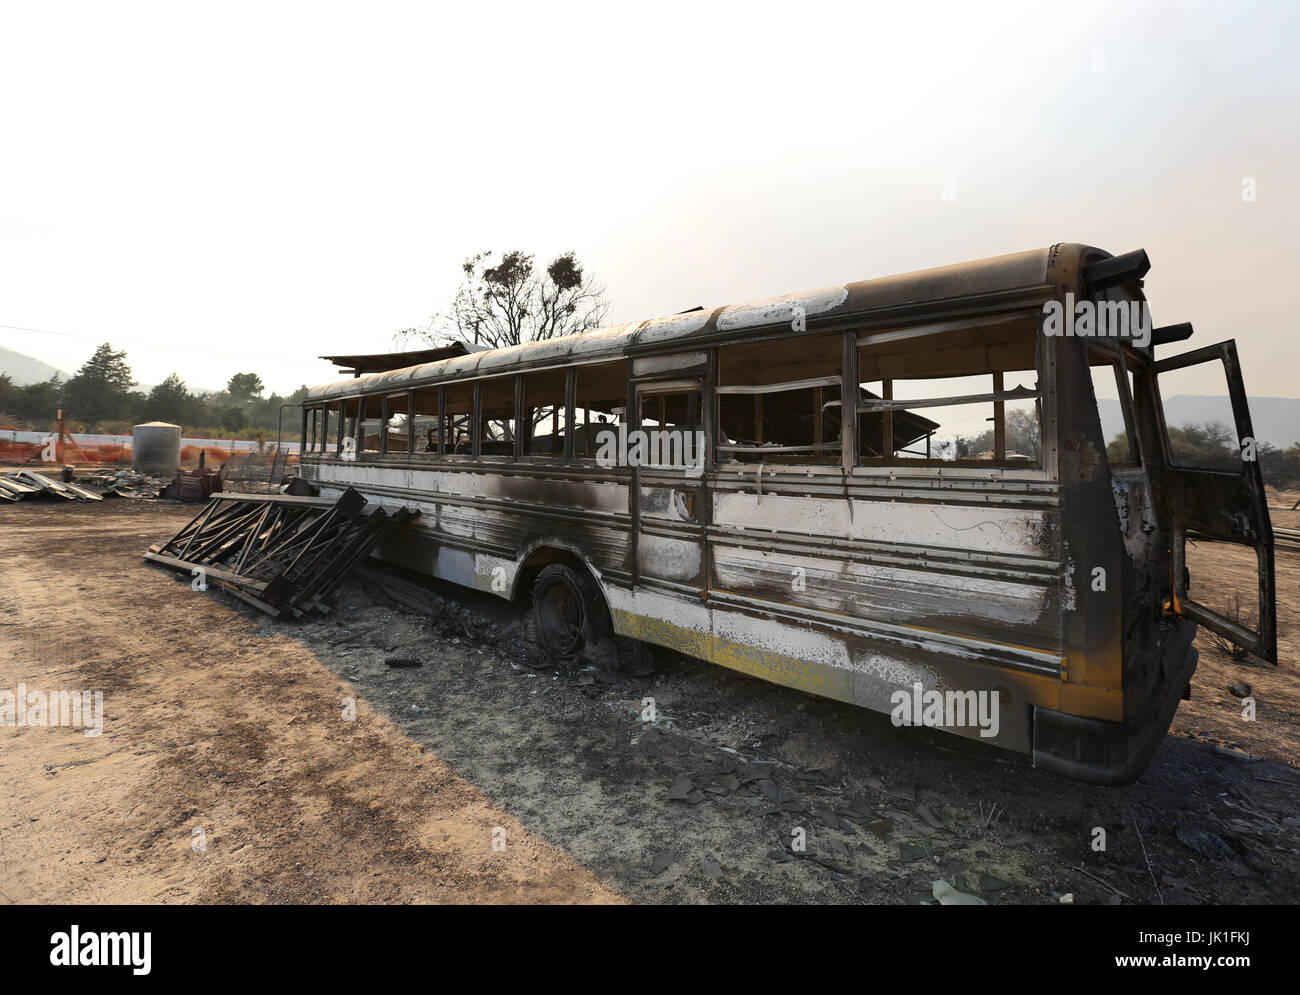 A burned out bus amidst the distruction caused by the Blue Cut Fire in Phelan, California, USA on 17th of August 2016. Stock Photo